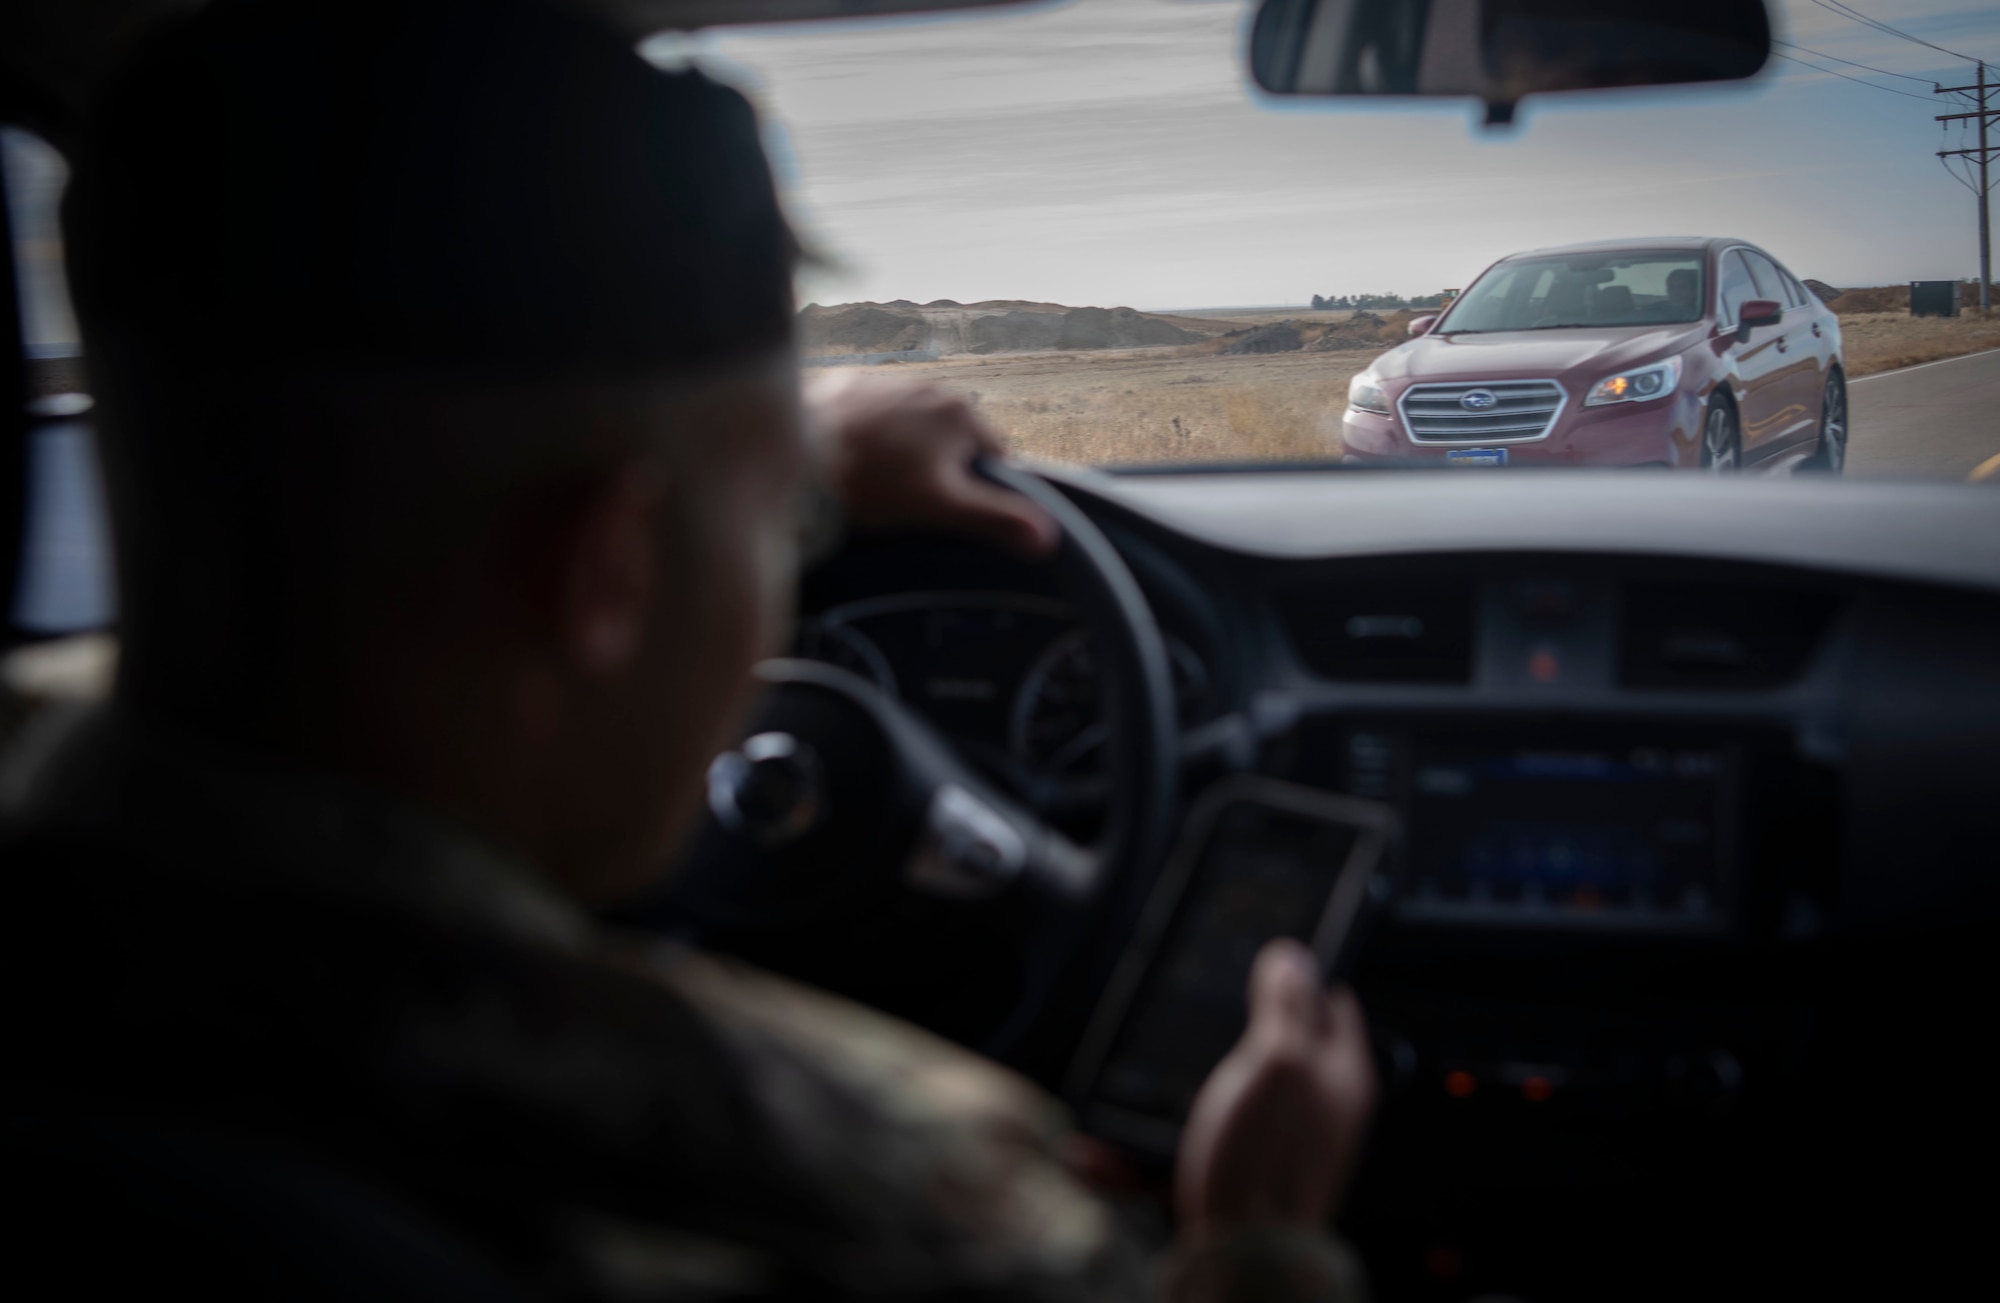 October is Distracted Driving Awareness Month and it’s important Airmen focus on the road and not their phone. There were over 15,000 accidents caused by distracted driving in 2019 according to the Colorado Department of Transportation. (U.S. Space Force photo by Airman 1st Class Jonathan Whitely)